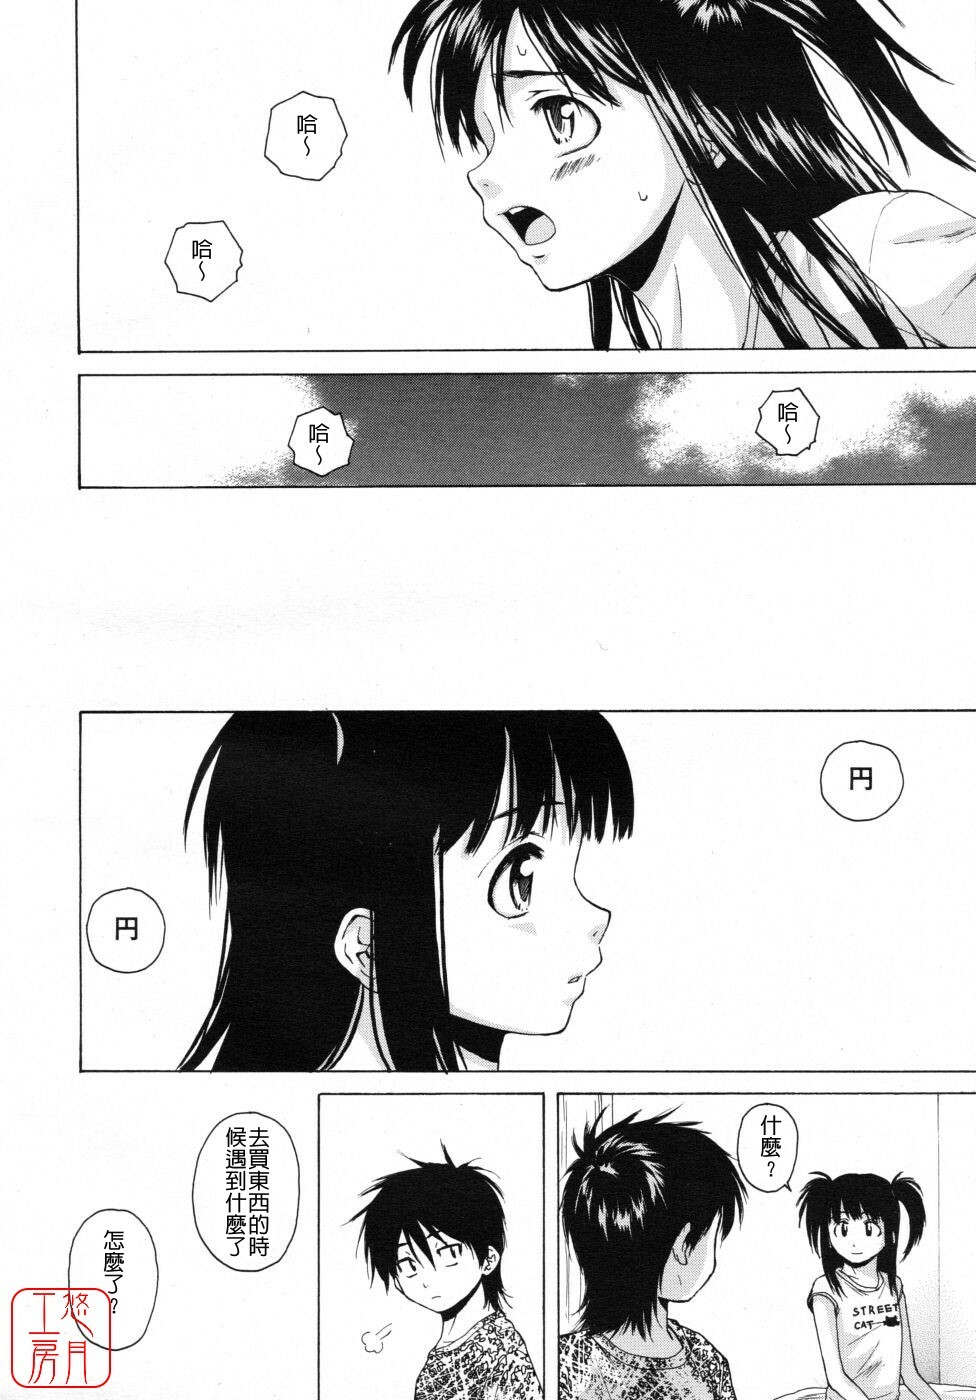 [Fuuga] Girl Friend 2 (Chinese) page 10 full